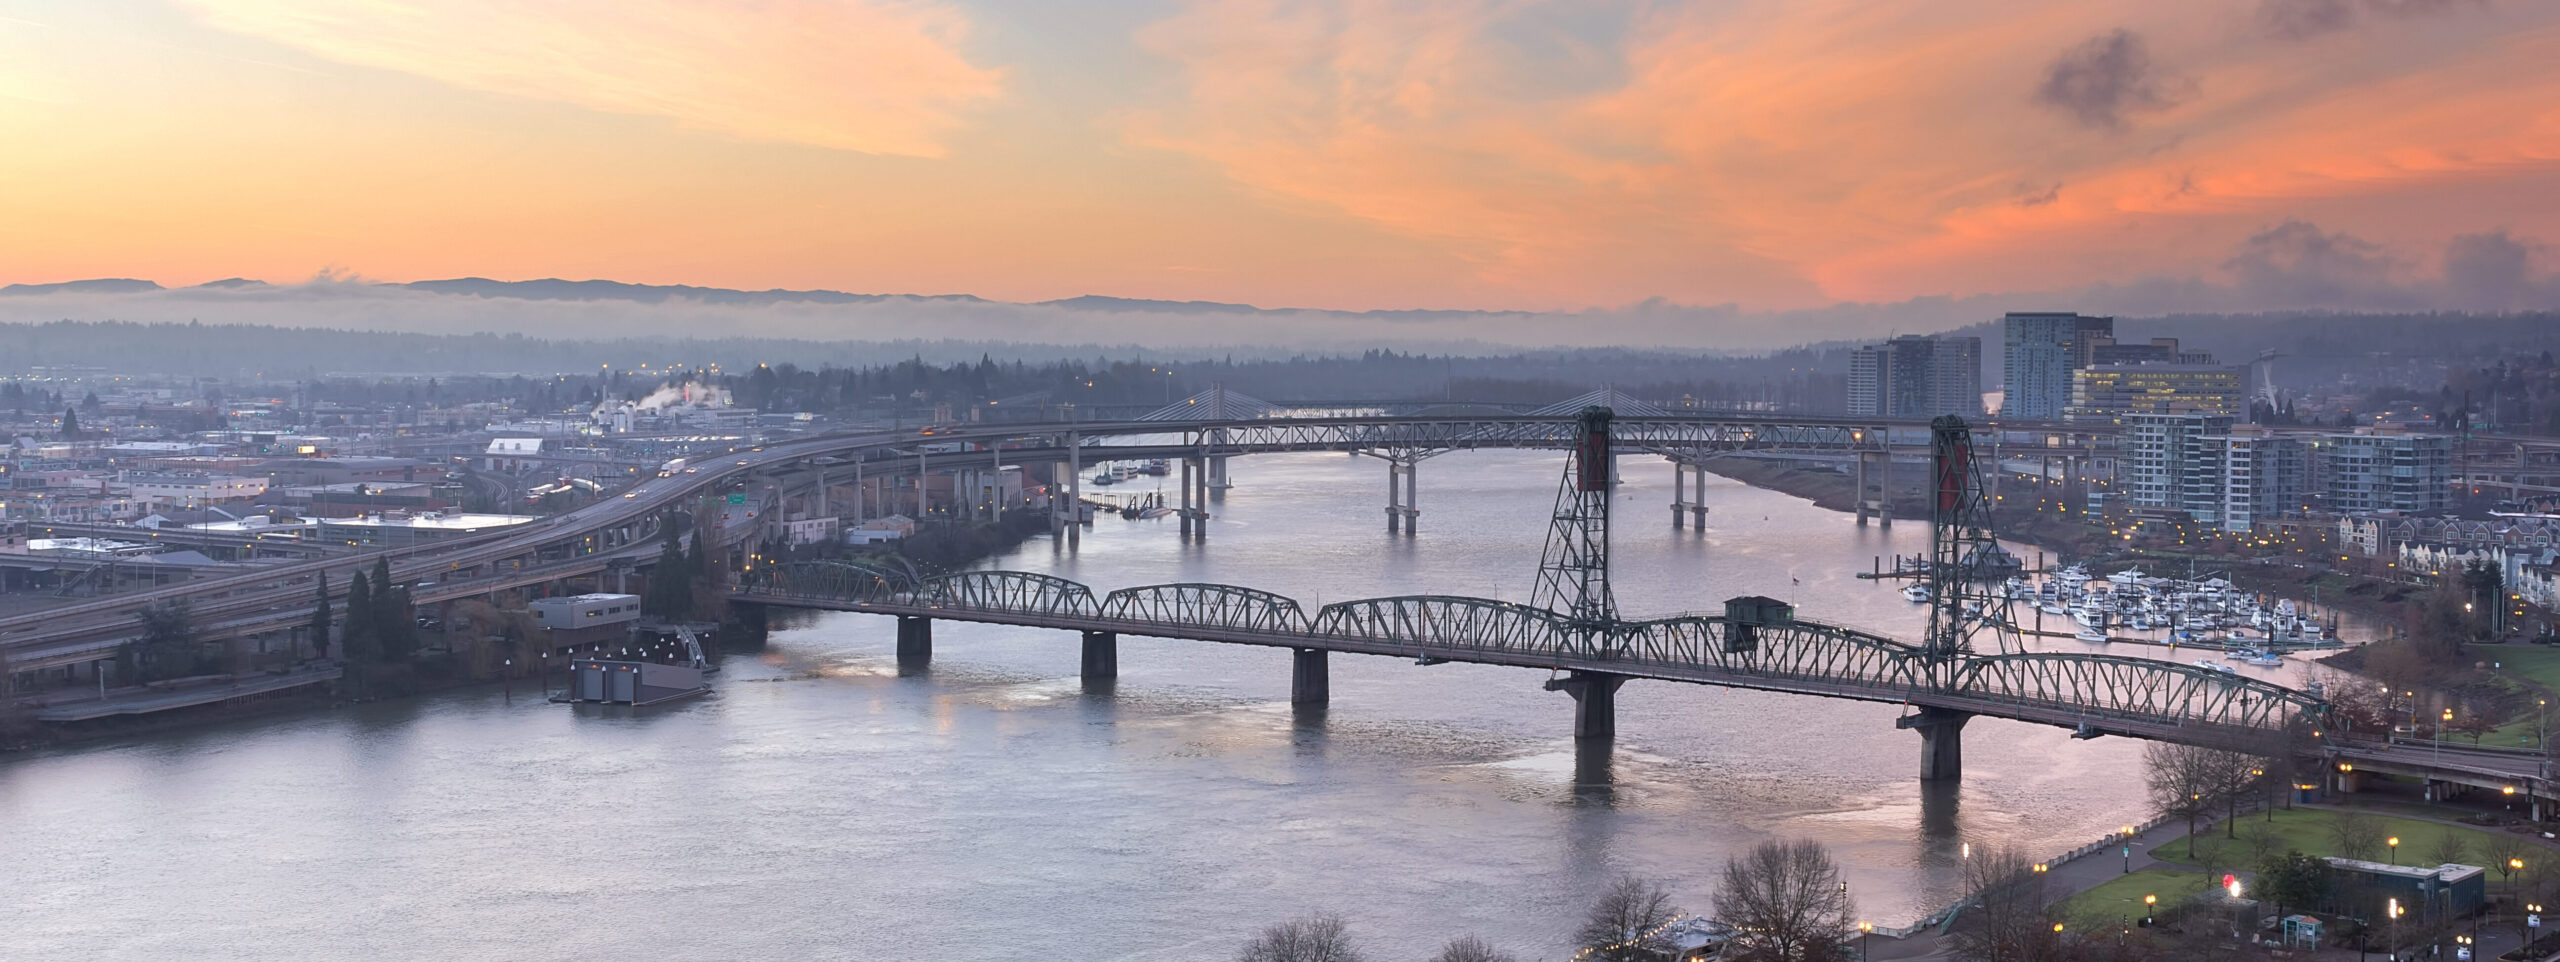 The Steel Bridge in Portland stretching across the city's river, with urban skyline in the background.